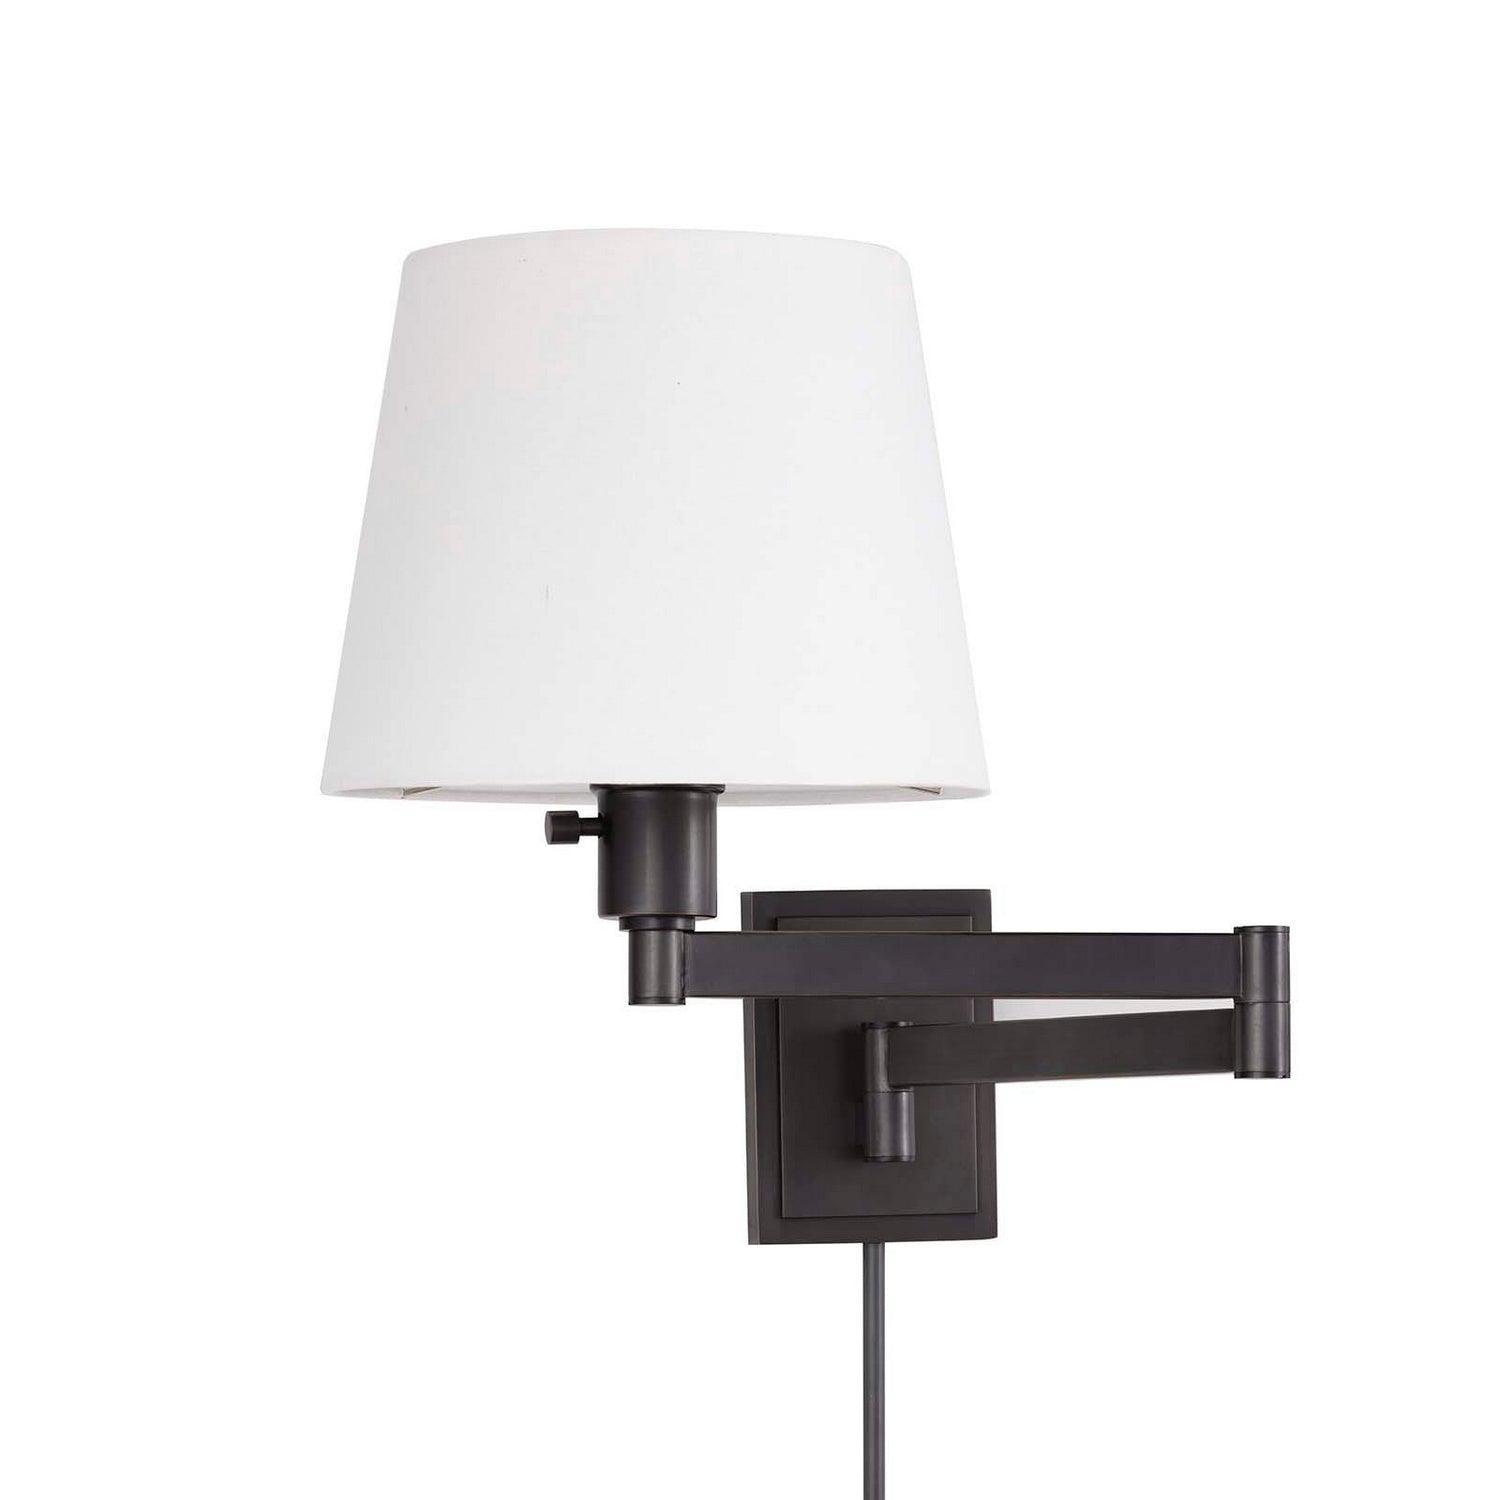 Regina Andrew - Southern Living Virtue Wall Sconce - 15-1161ORB | Montreal Lighting & Hardware